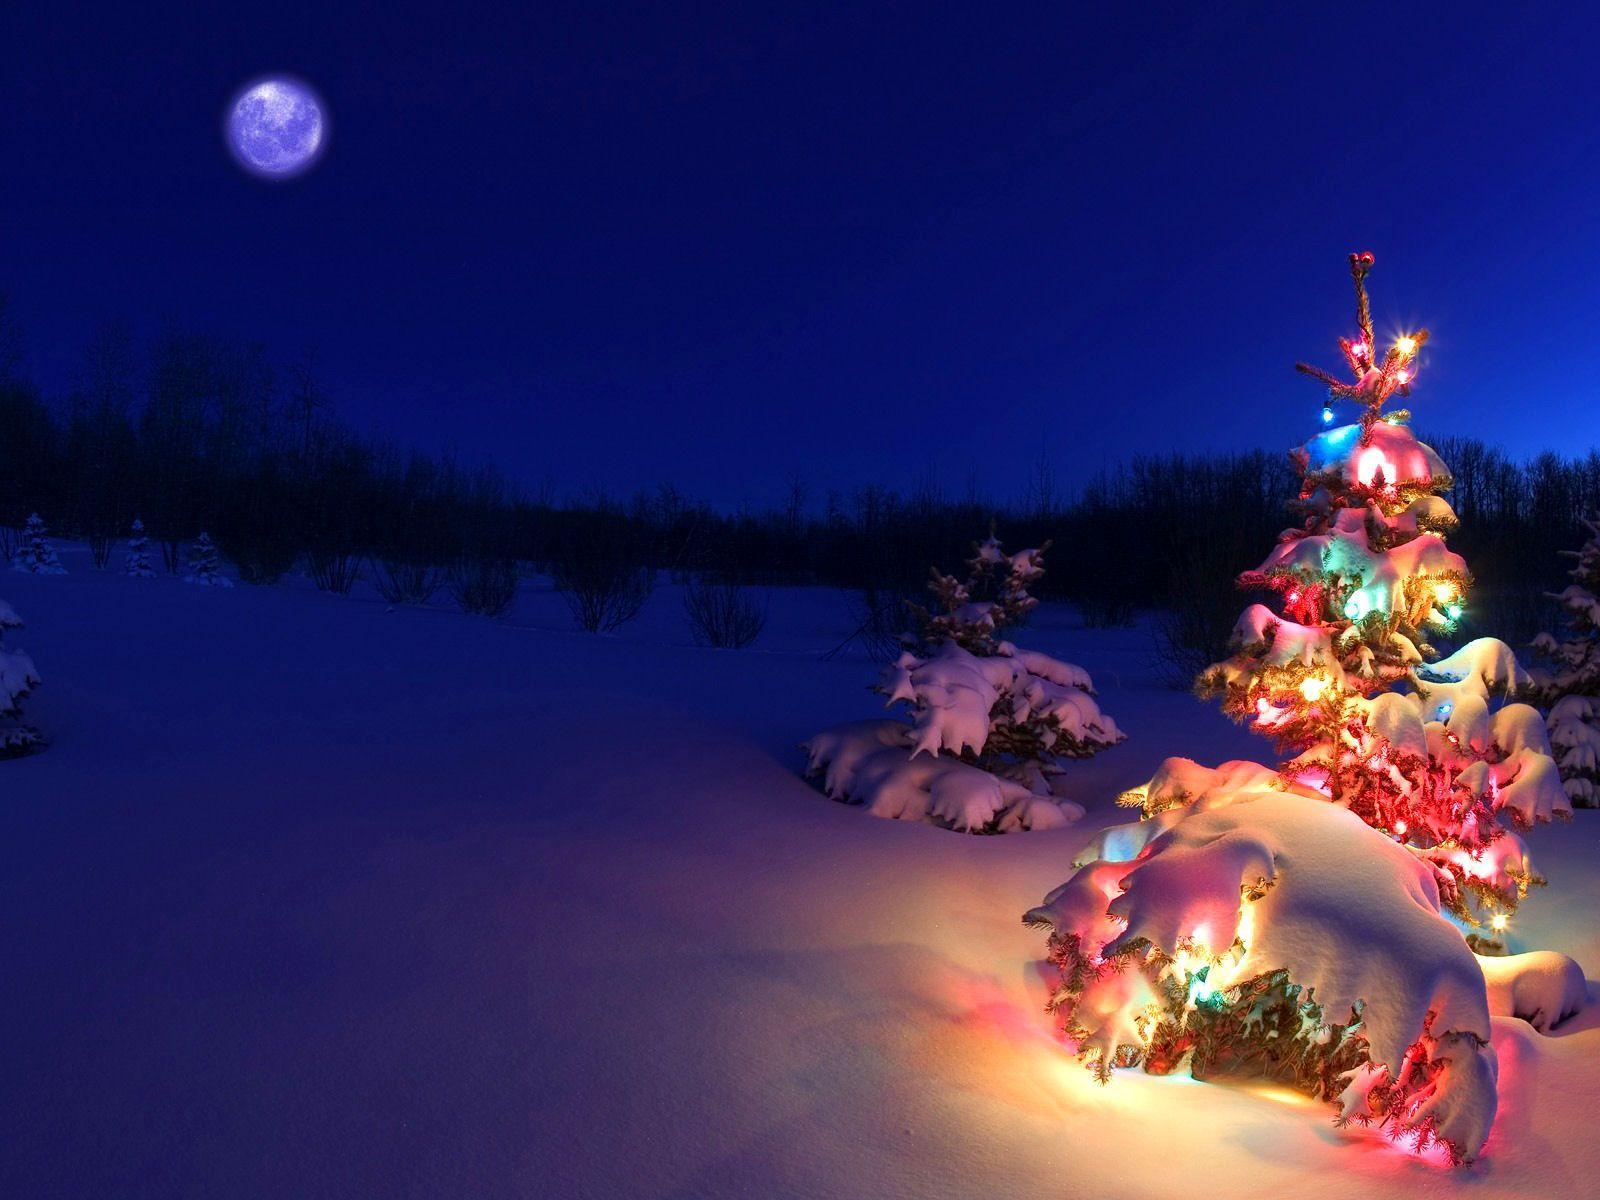 You have snow and a spruce? You have Christmas. Christmas desktop, Christmas wallpaper hd, Christmas desktop wallpaper